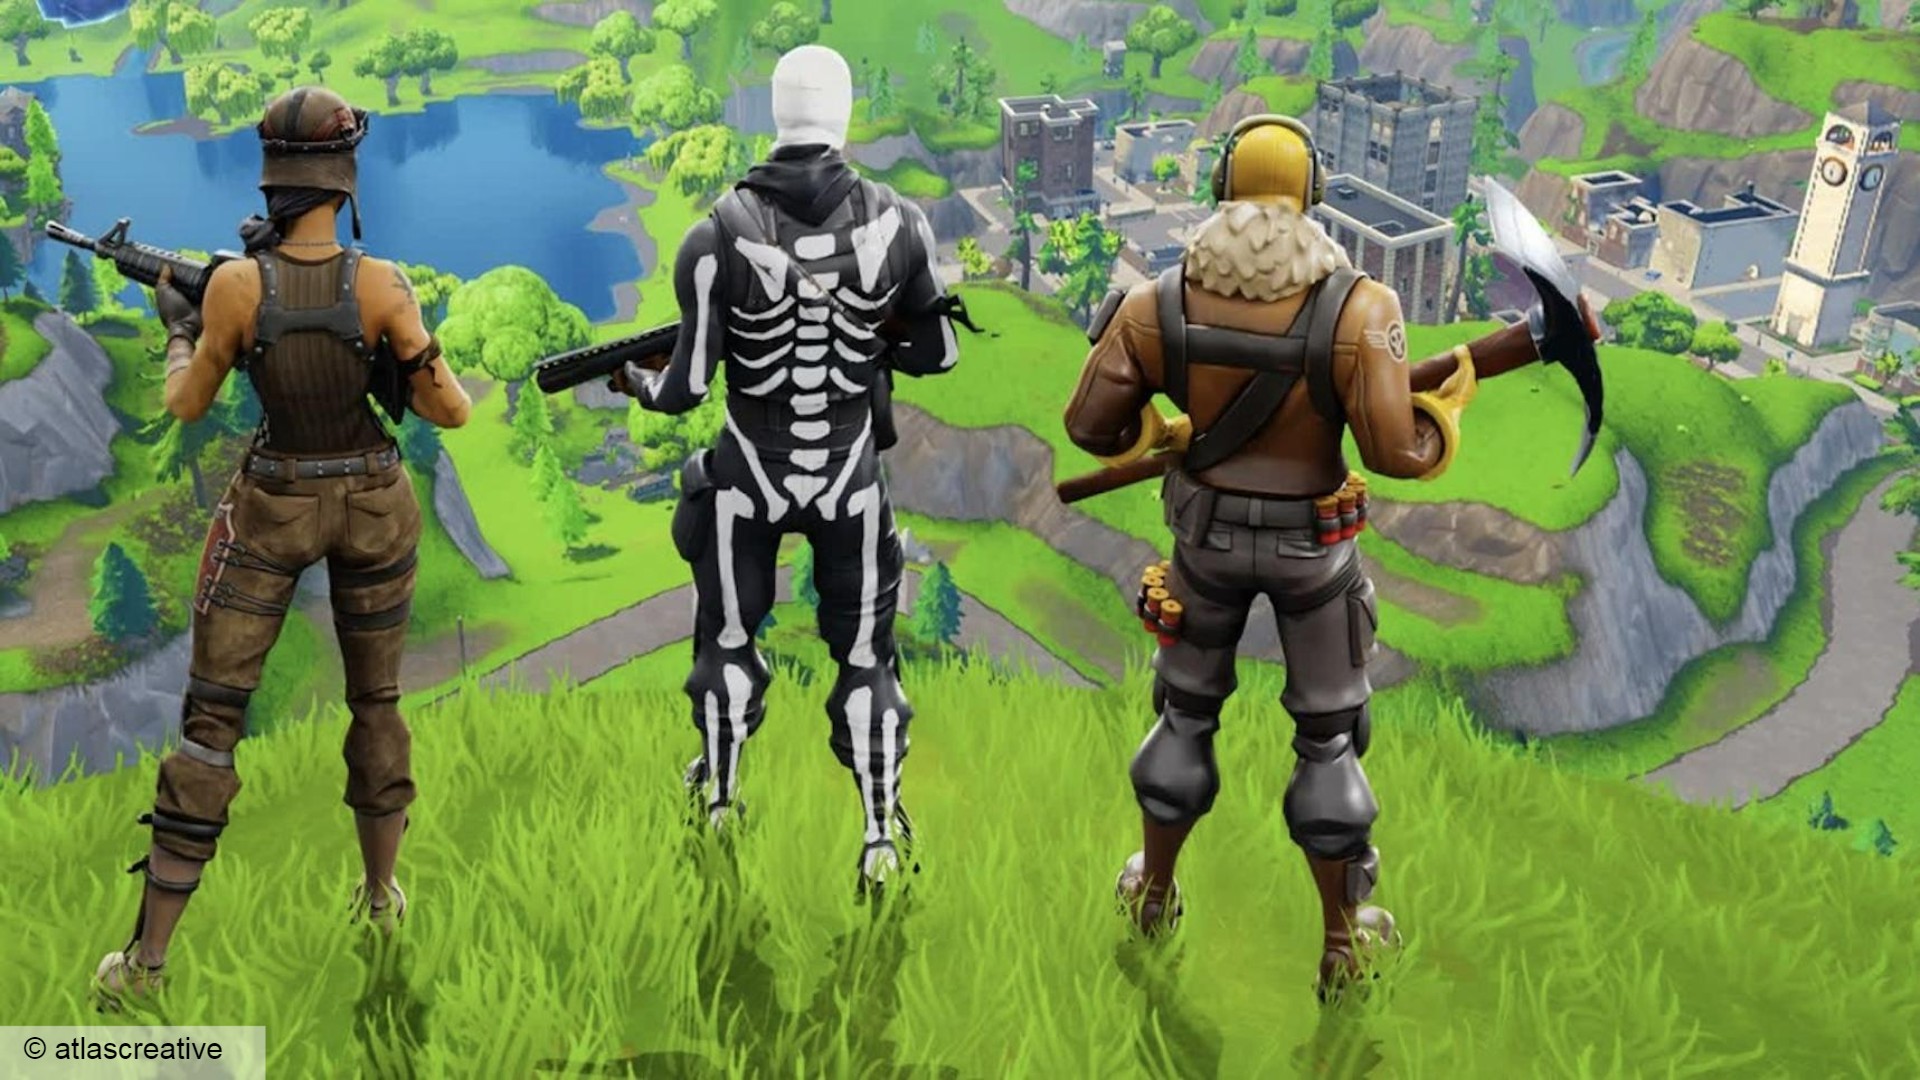 What is the max level in Fortnite OG?